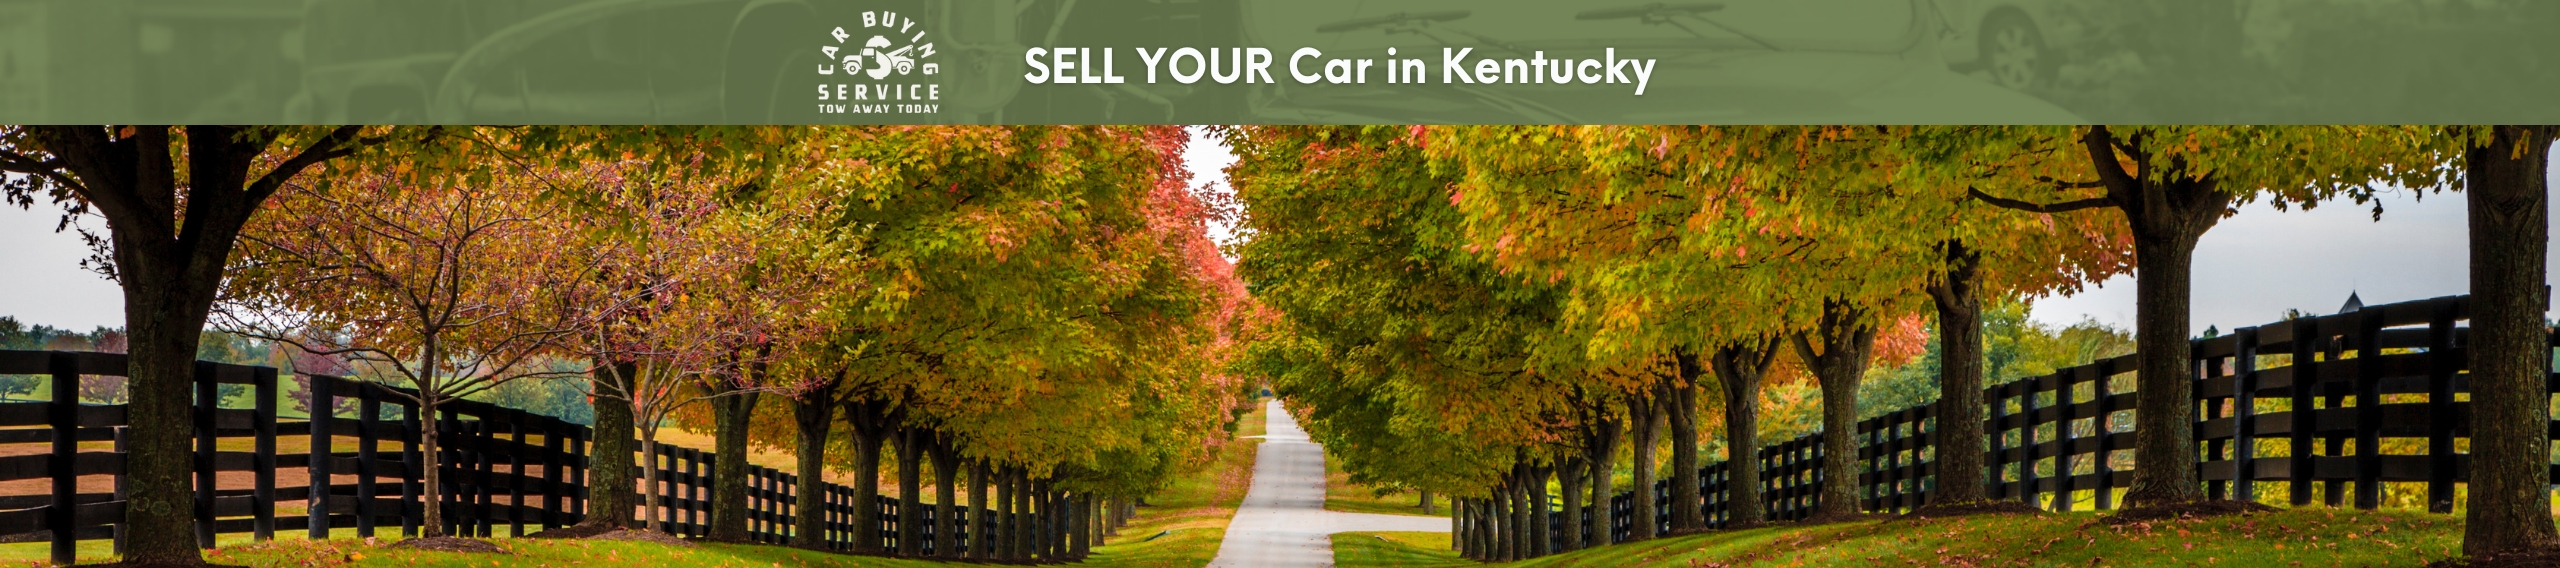 Sell junk Car for Cash in Kentucky